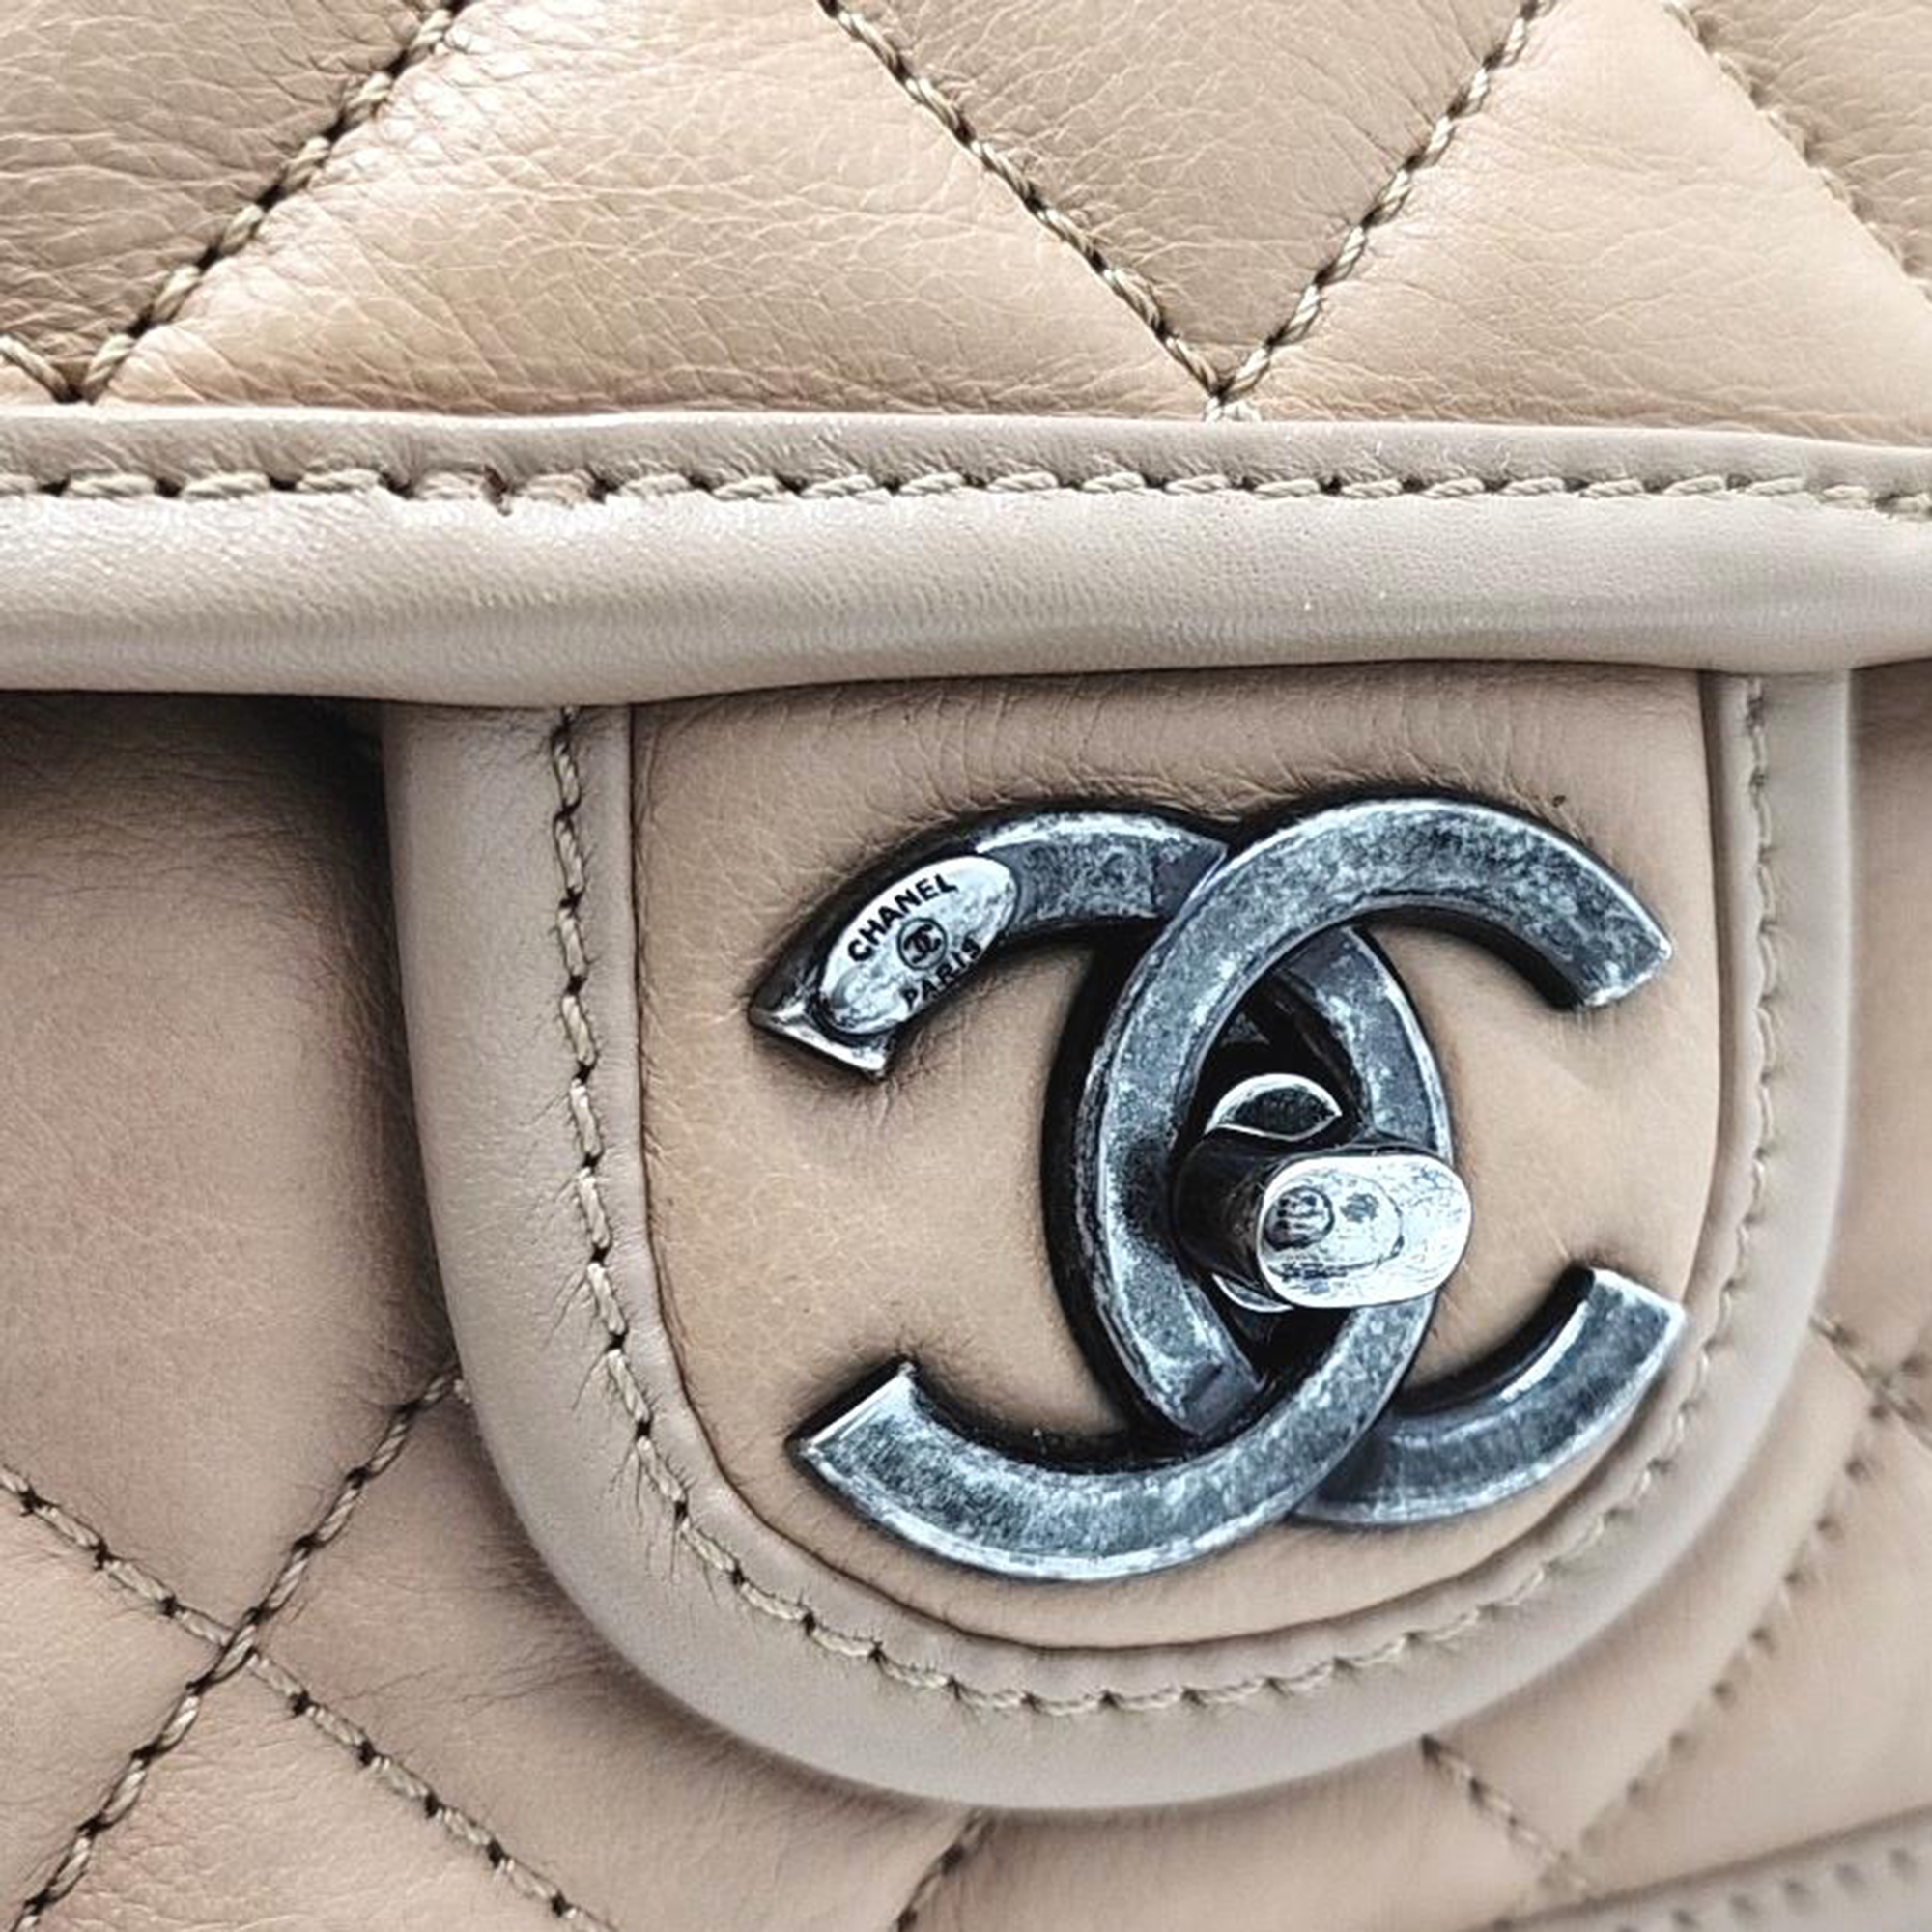 Chanel Leather Beige Flap Chain Bag